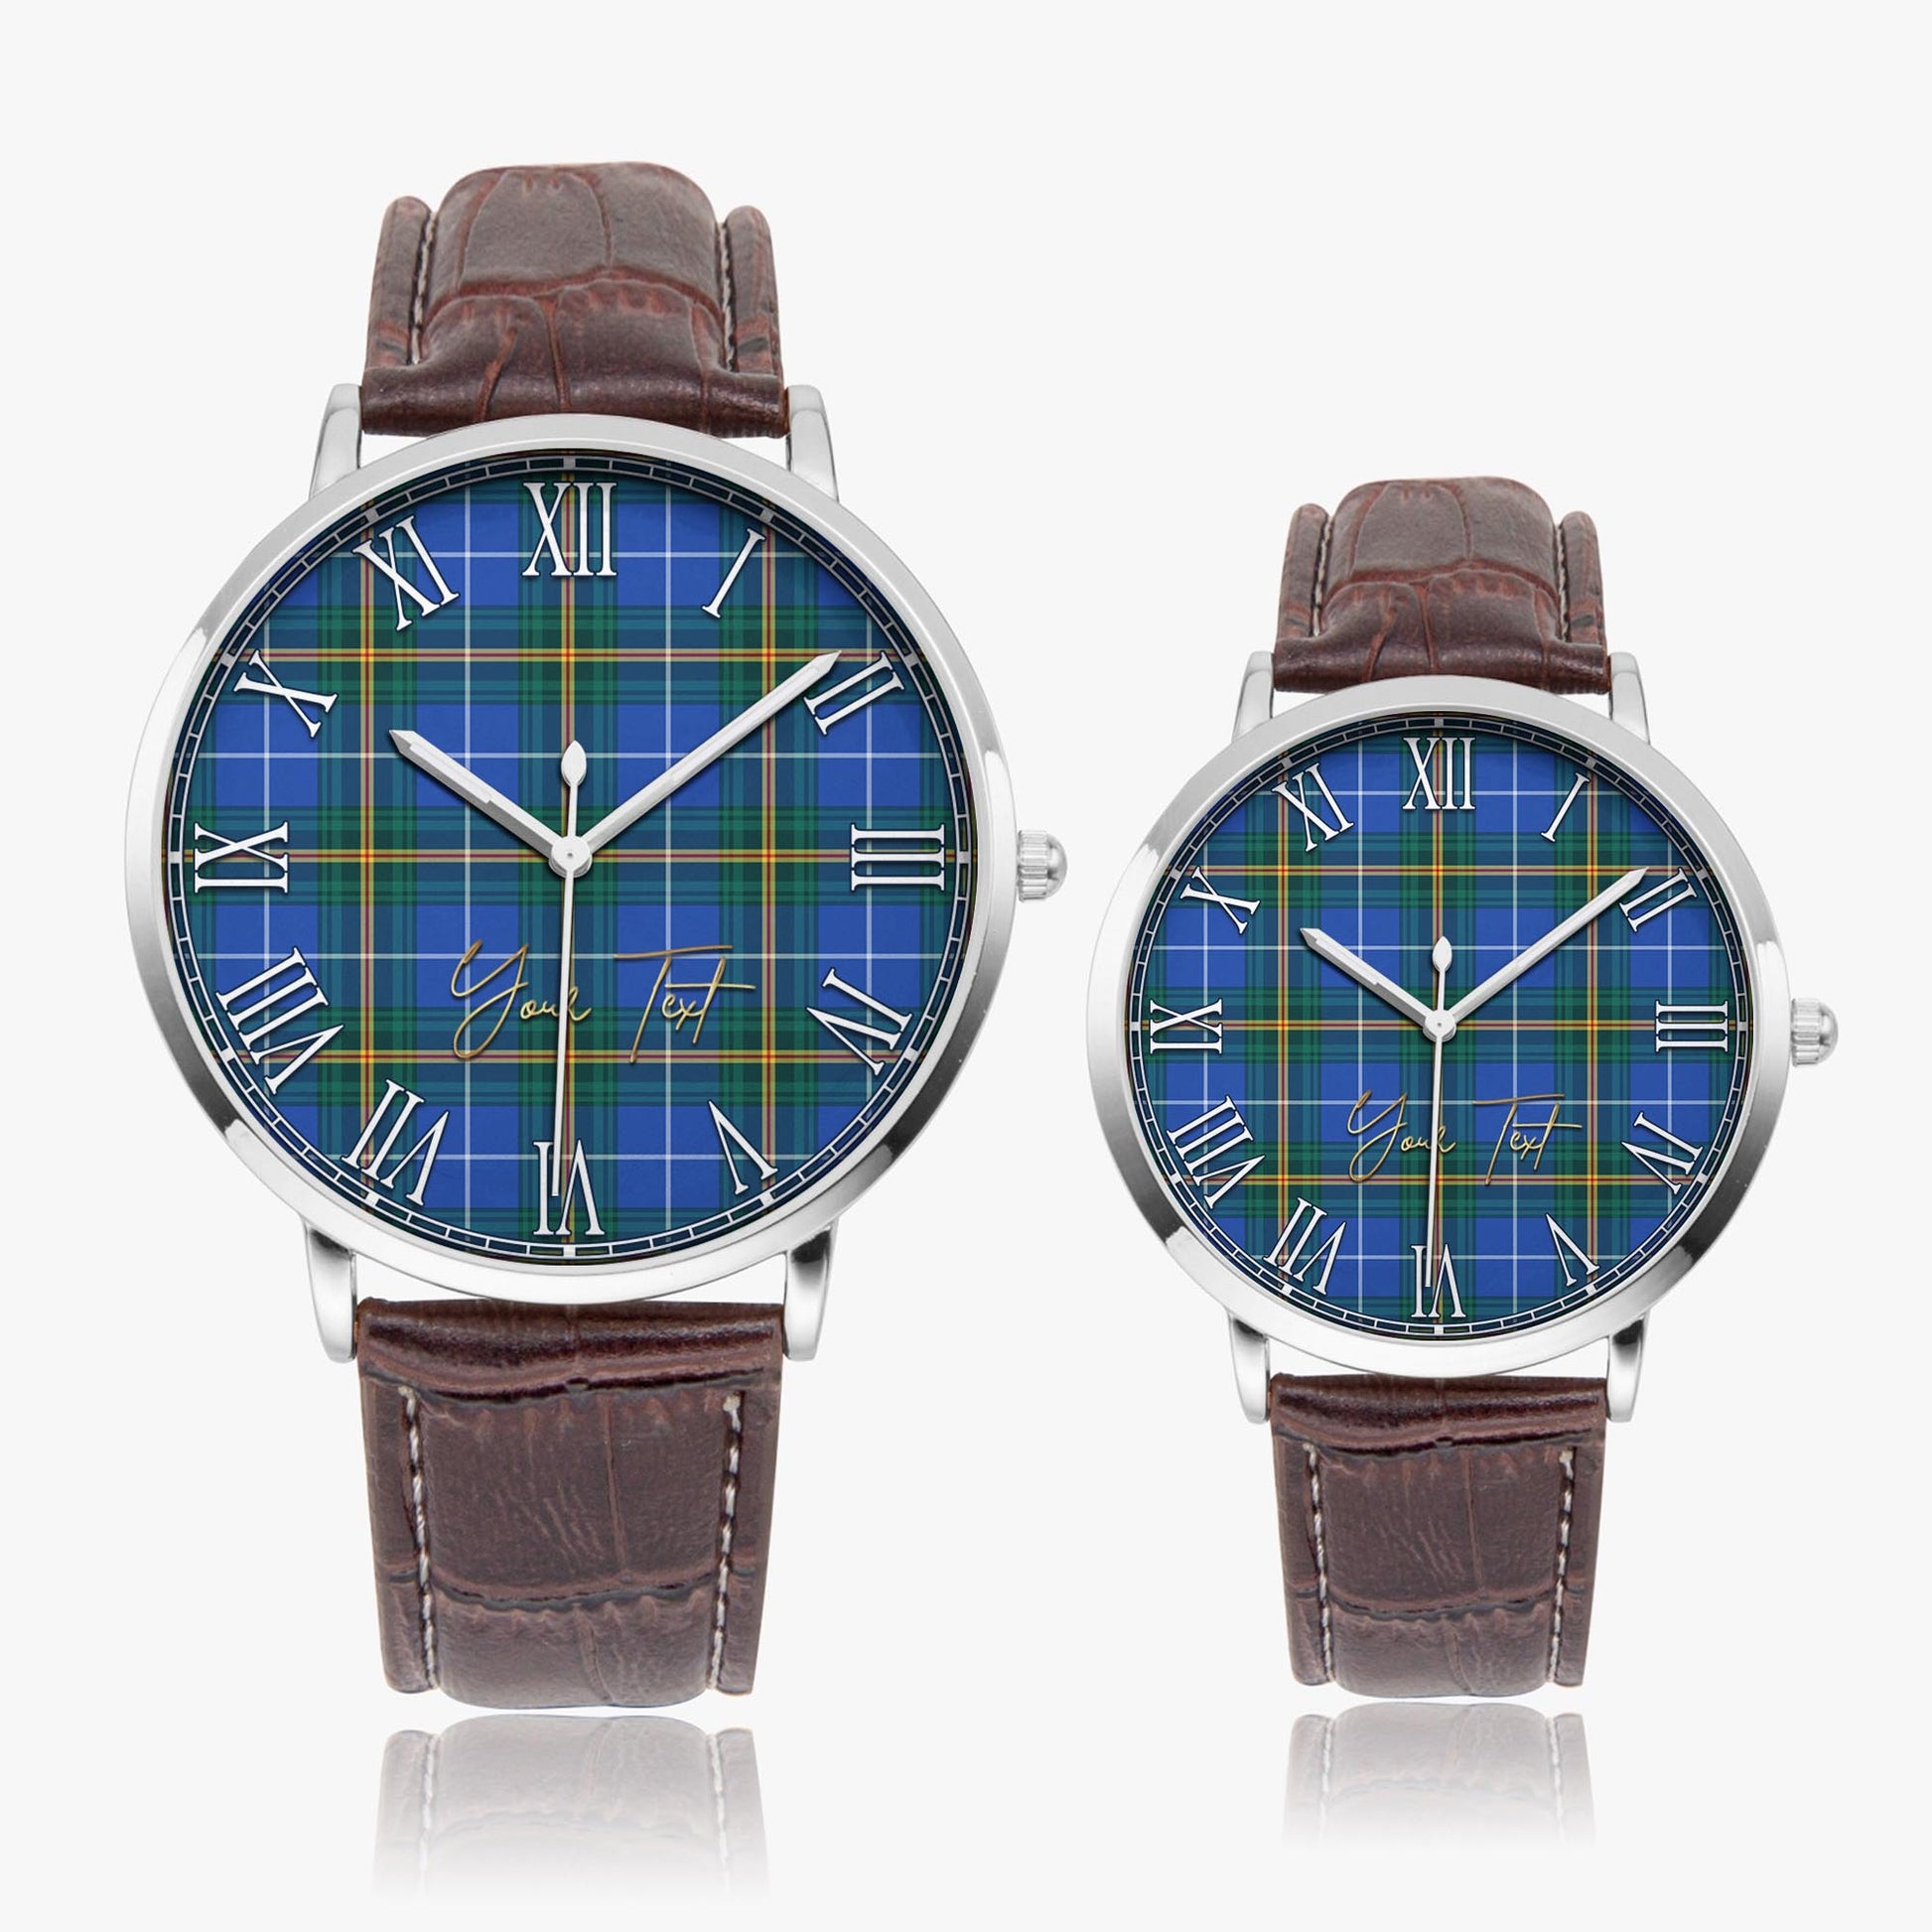 Nova Scotia Province Canada Tartan Personalized Your Text Leather Trap Quartz Watch Ultra Thin Silver Case With Brown Leather Strap - Tartanvibesclothing